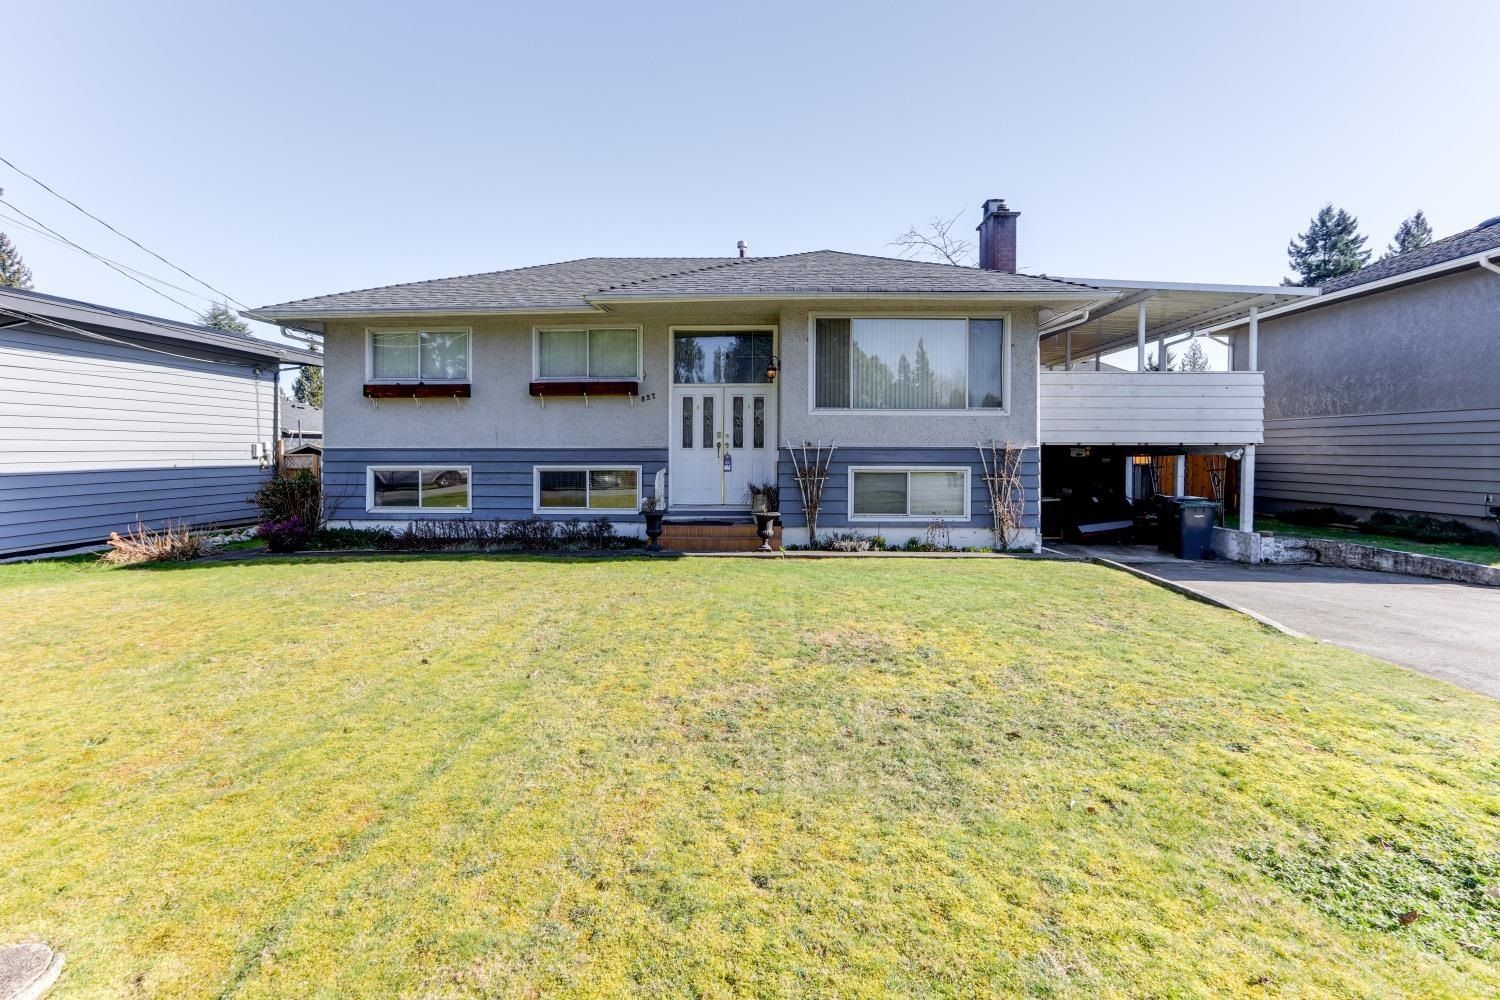 Open House. Open House on Sunday, March 13, 2022 2:00PM - 4:00PM